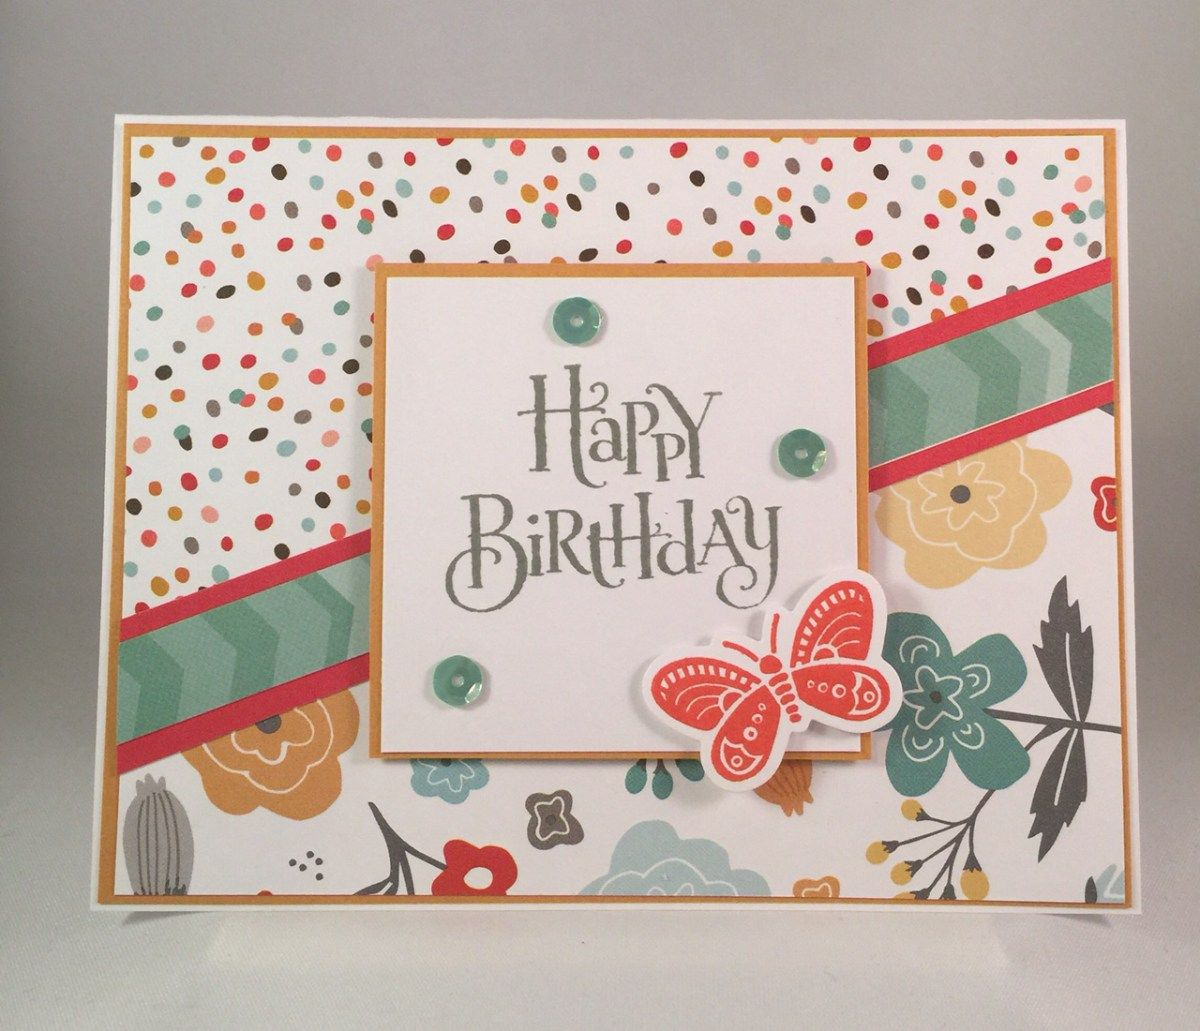 Scrapbooking Birthday Card Ideas Big Birthday Cards Target Online For Him Handmade Envelopes How Are